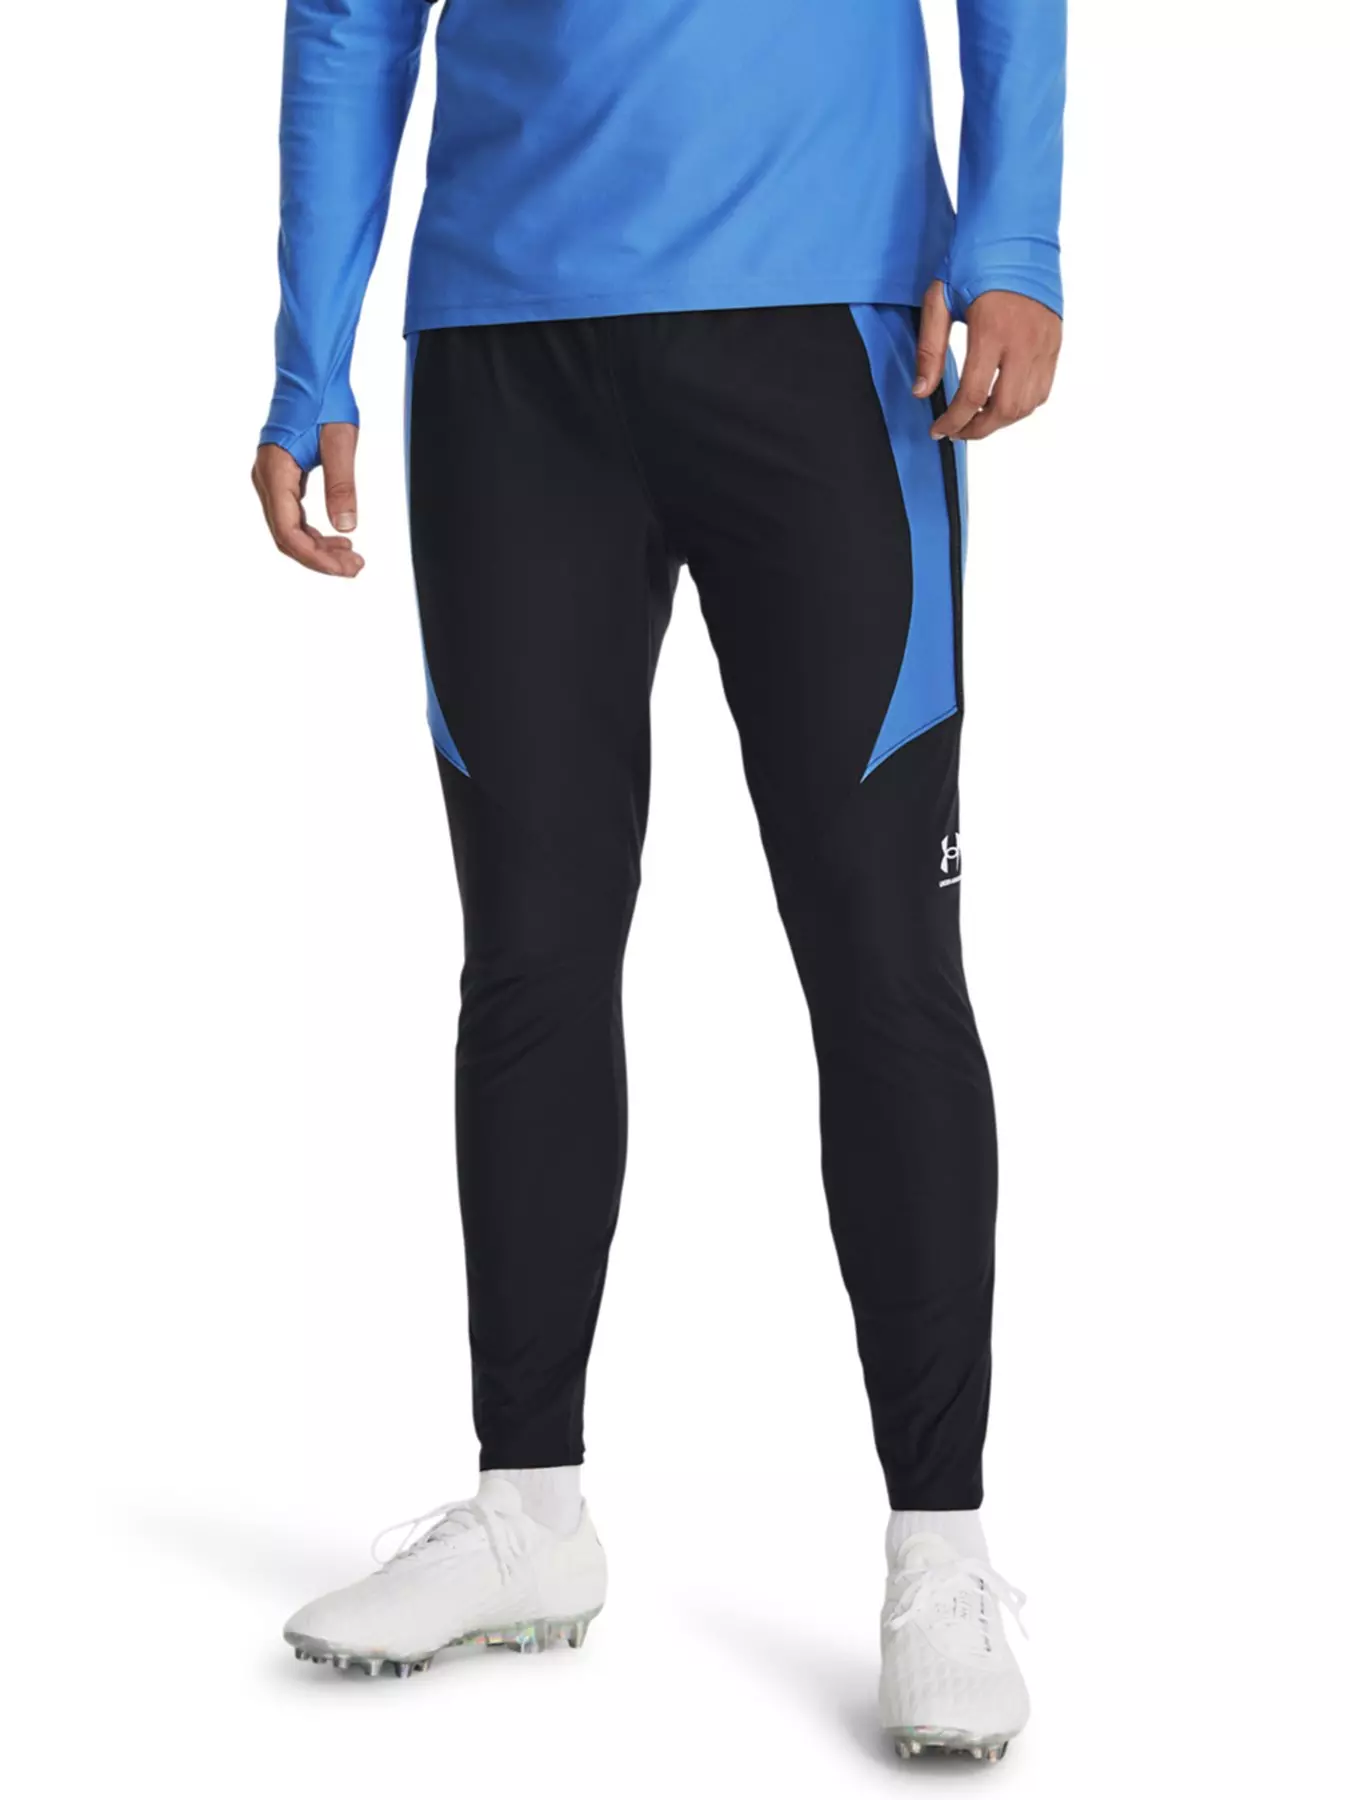 Under Armour Men's Challenger Training Pant, Tracksuit Bottoms for